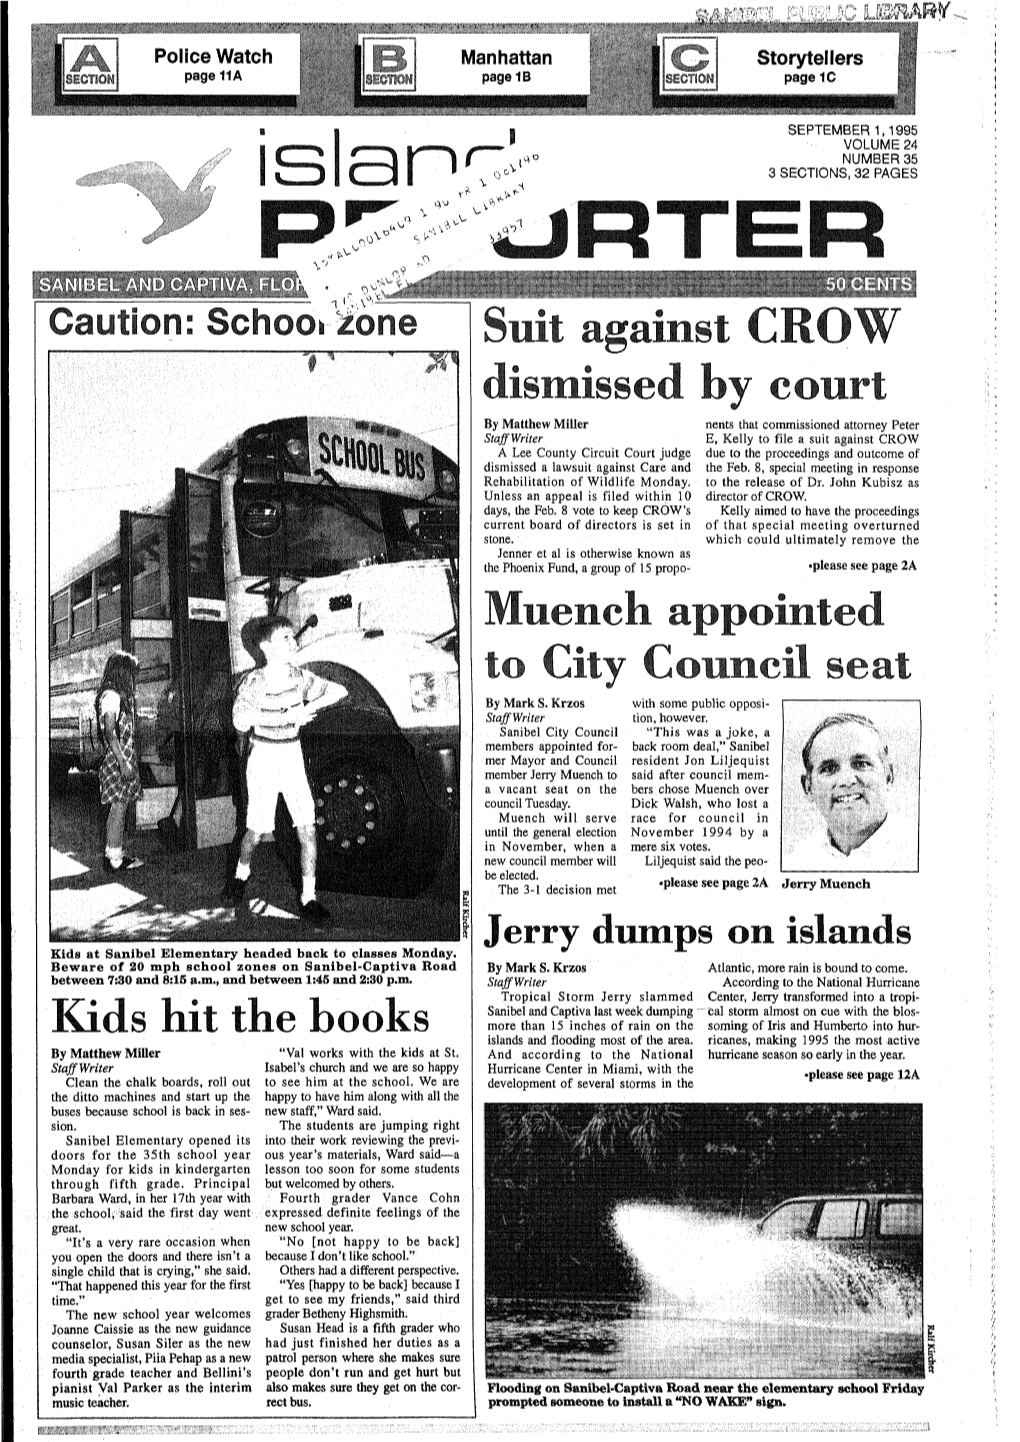 Kids Hit the Books Dismissed by Court Muench Appointed to City Council